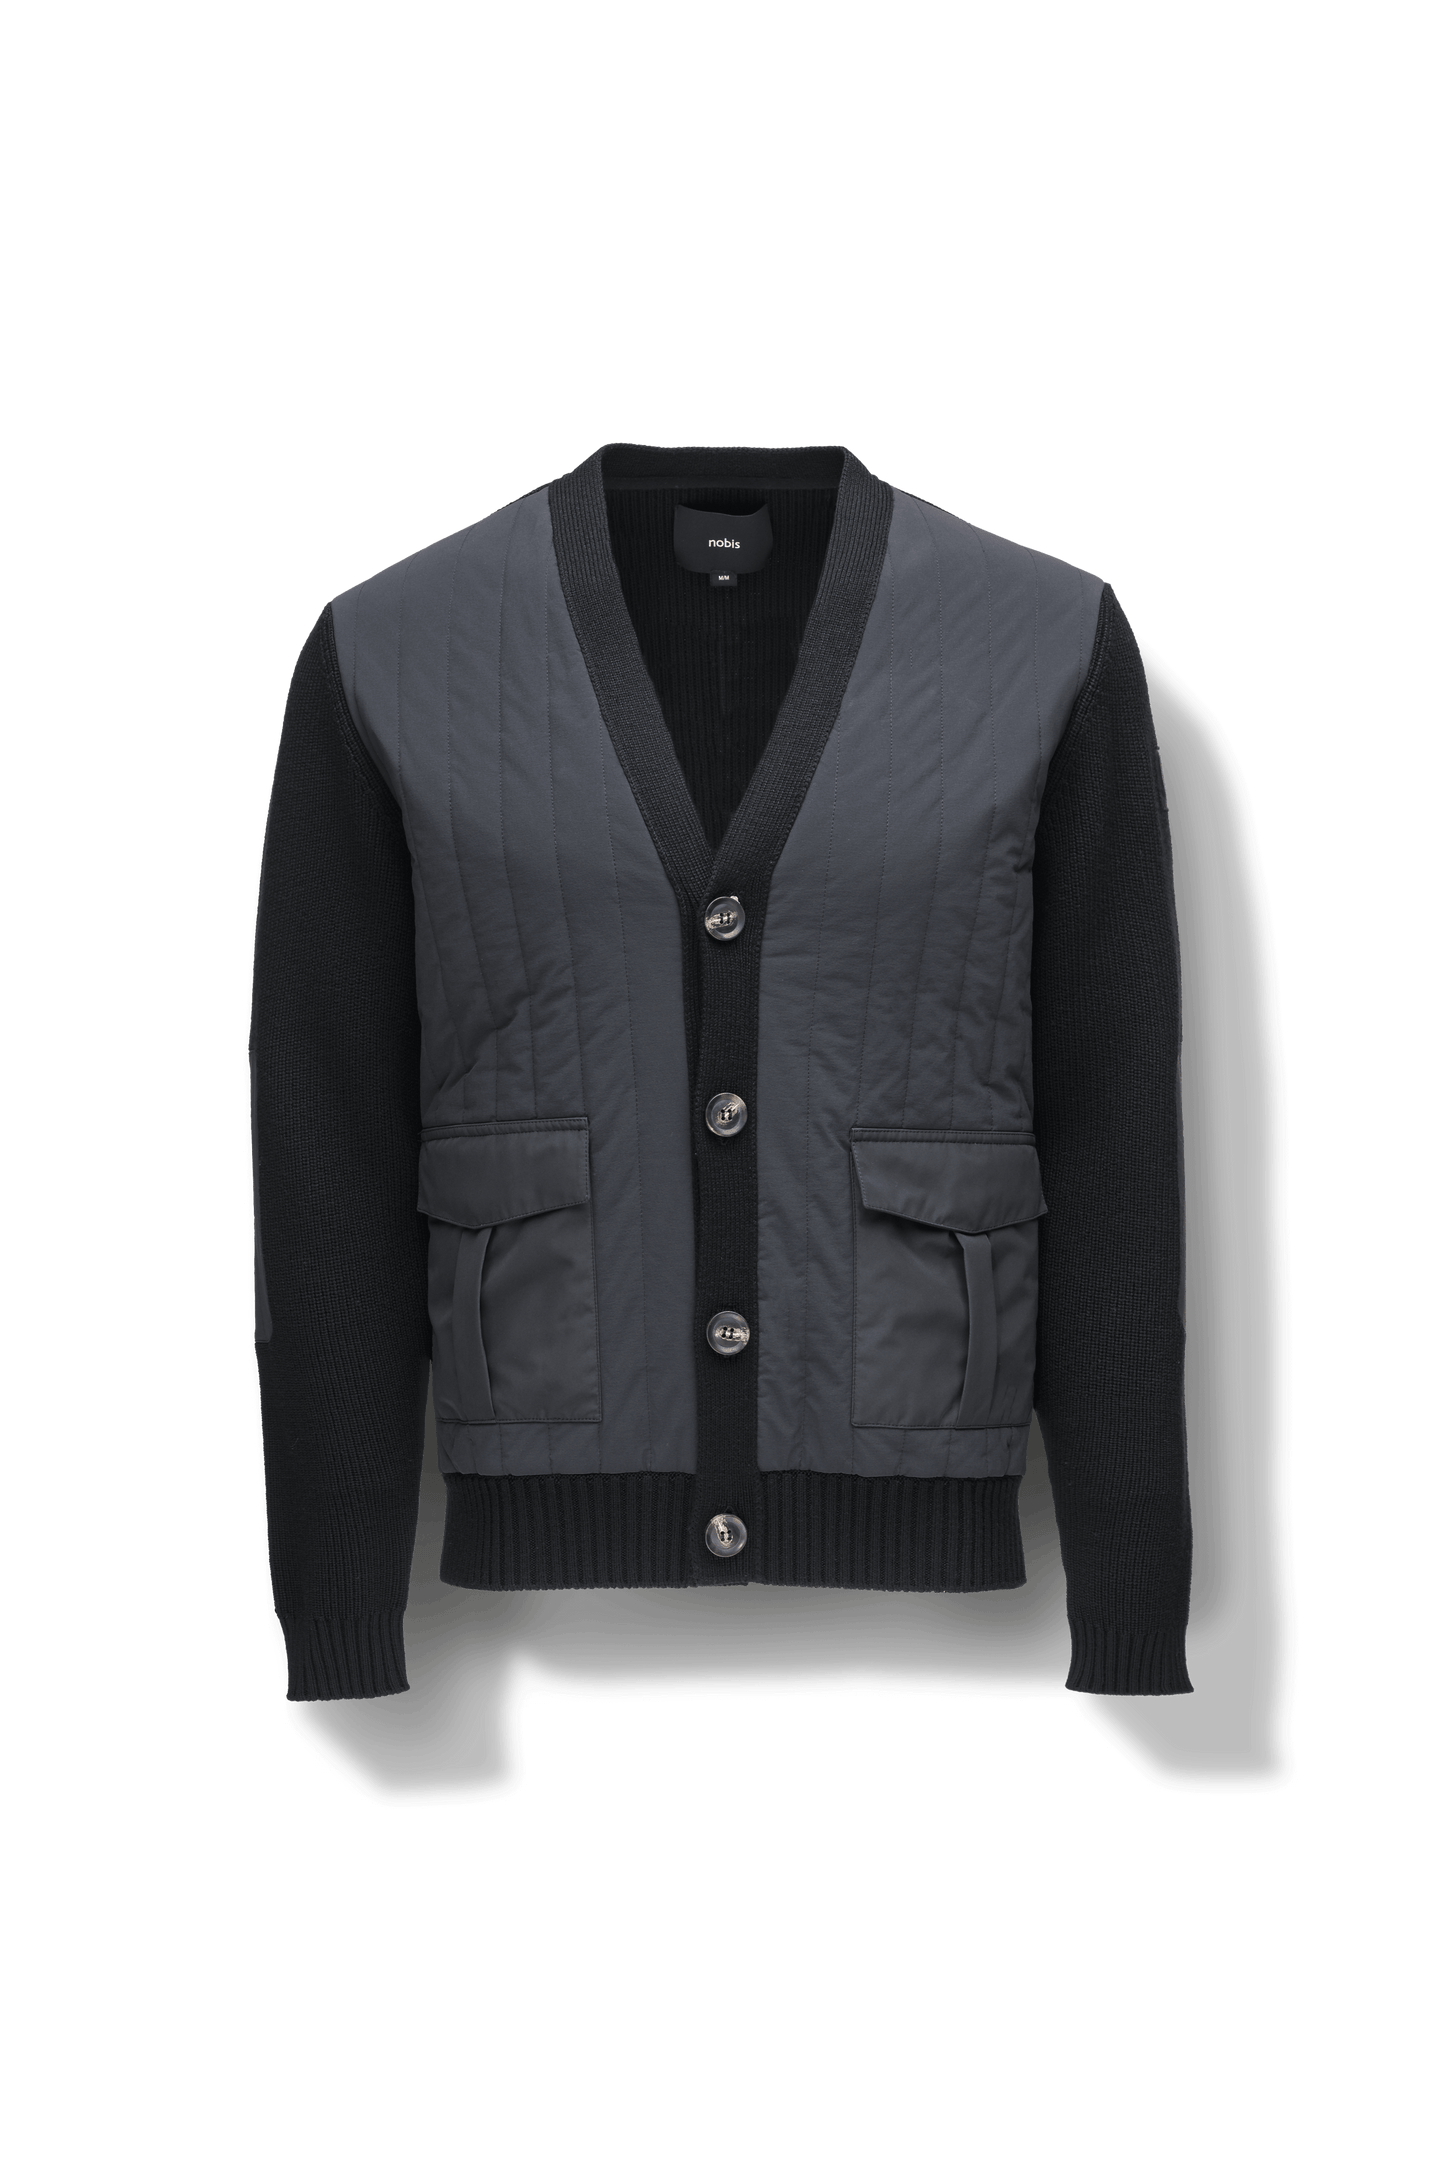 Watson Men's Hybrid V-Neck Sweater in hip length, premium stretch ripstop and 100% virgin extra fine merino wool knit fabrication, Primaloft Gold Insulation Active+, button front closure, snap button closure flap pockets at waist with additional side-entry, in Black